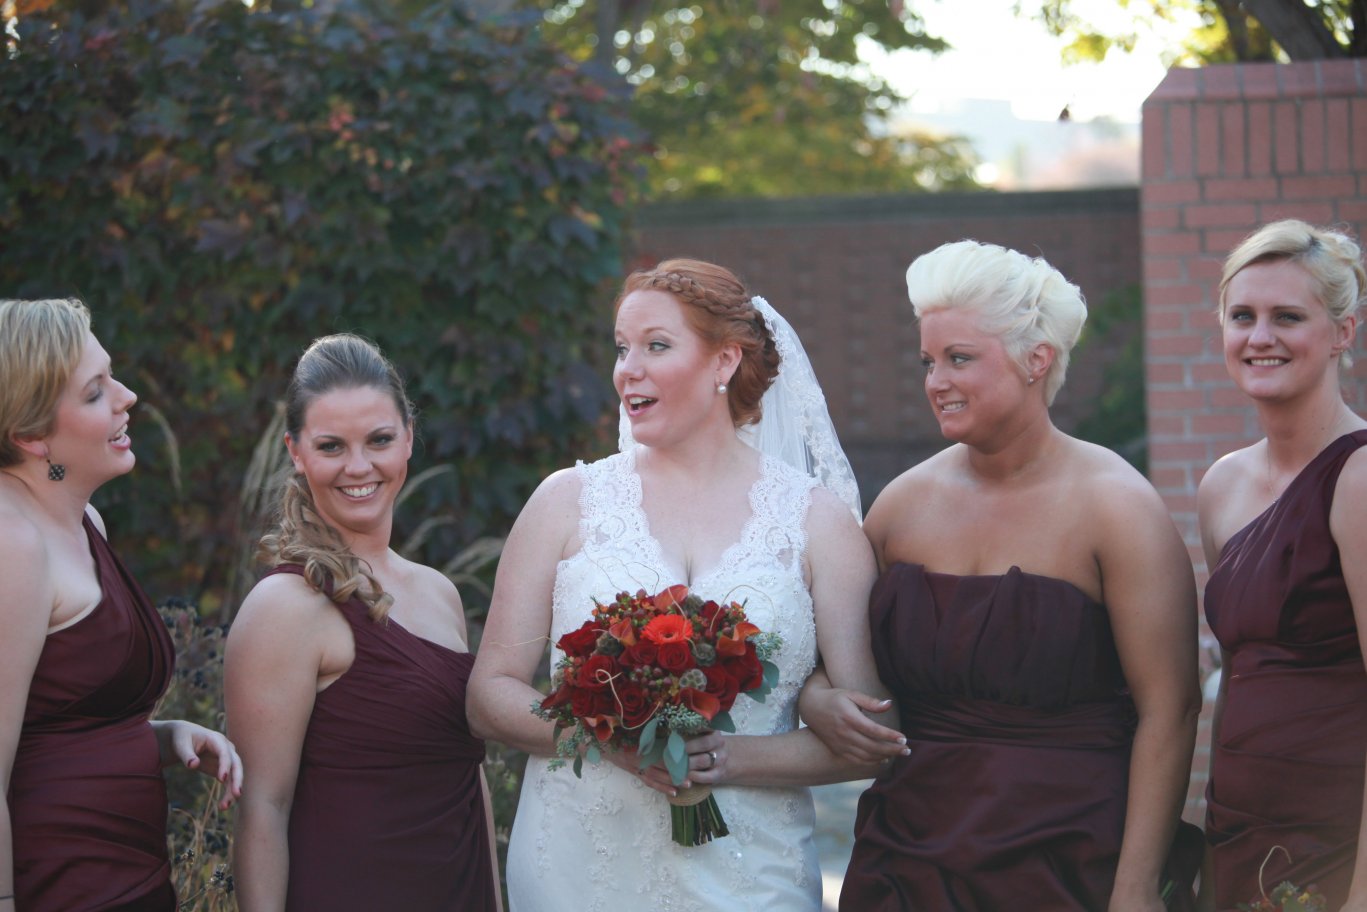 Wedding Party Featuring Fall Color Designs By CK Designs (Photography By: Jennifer Soots)